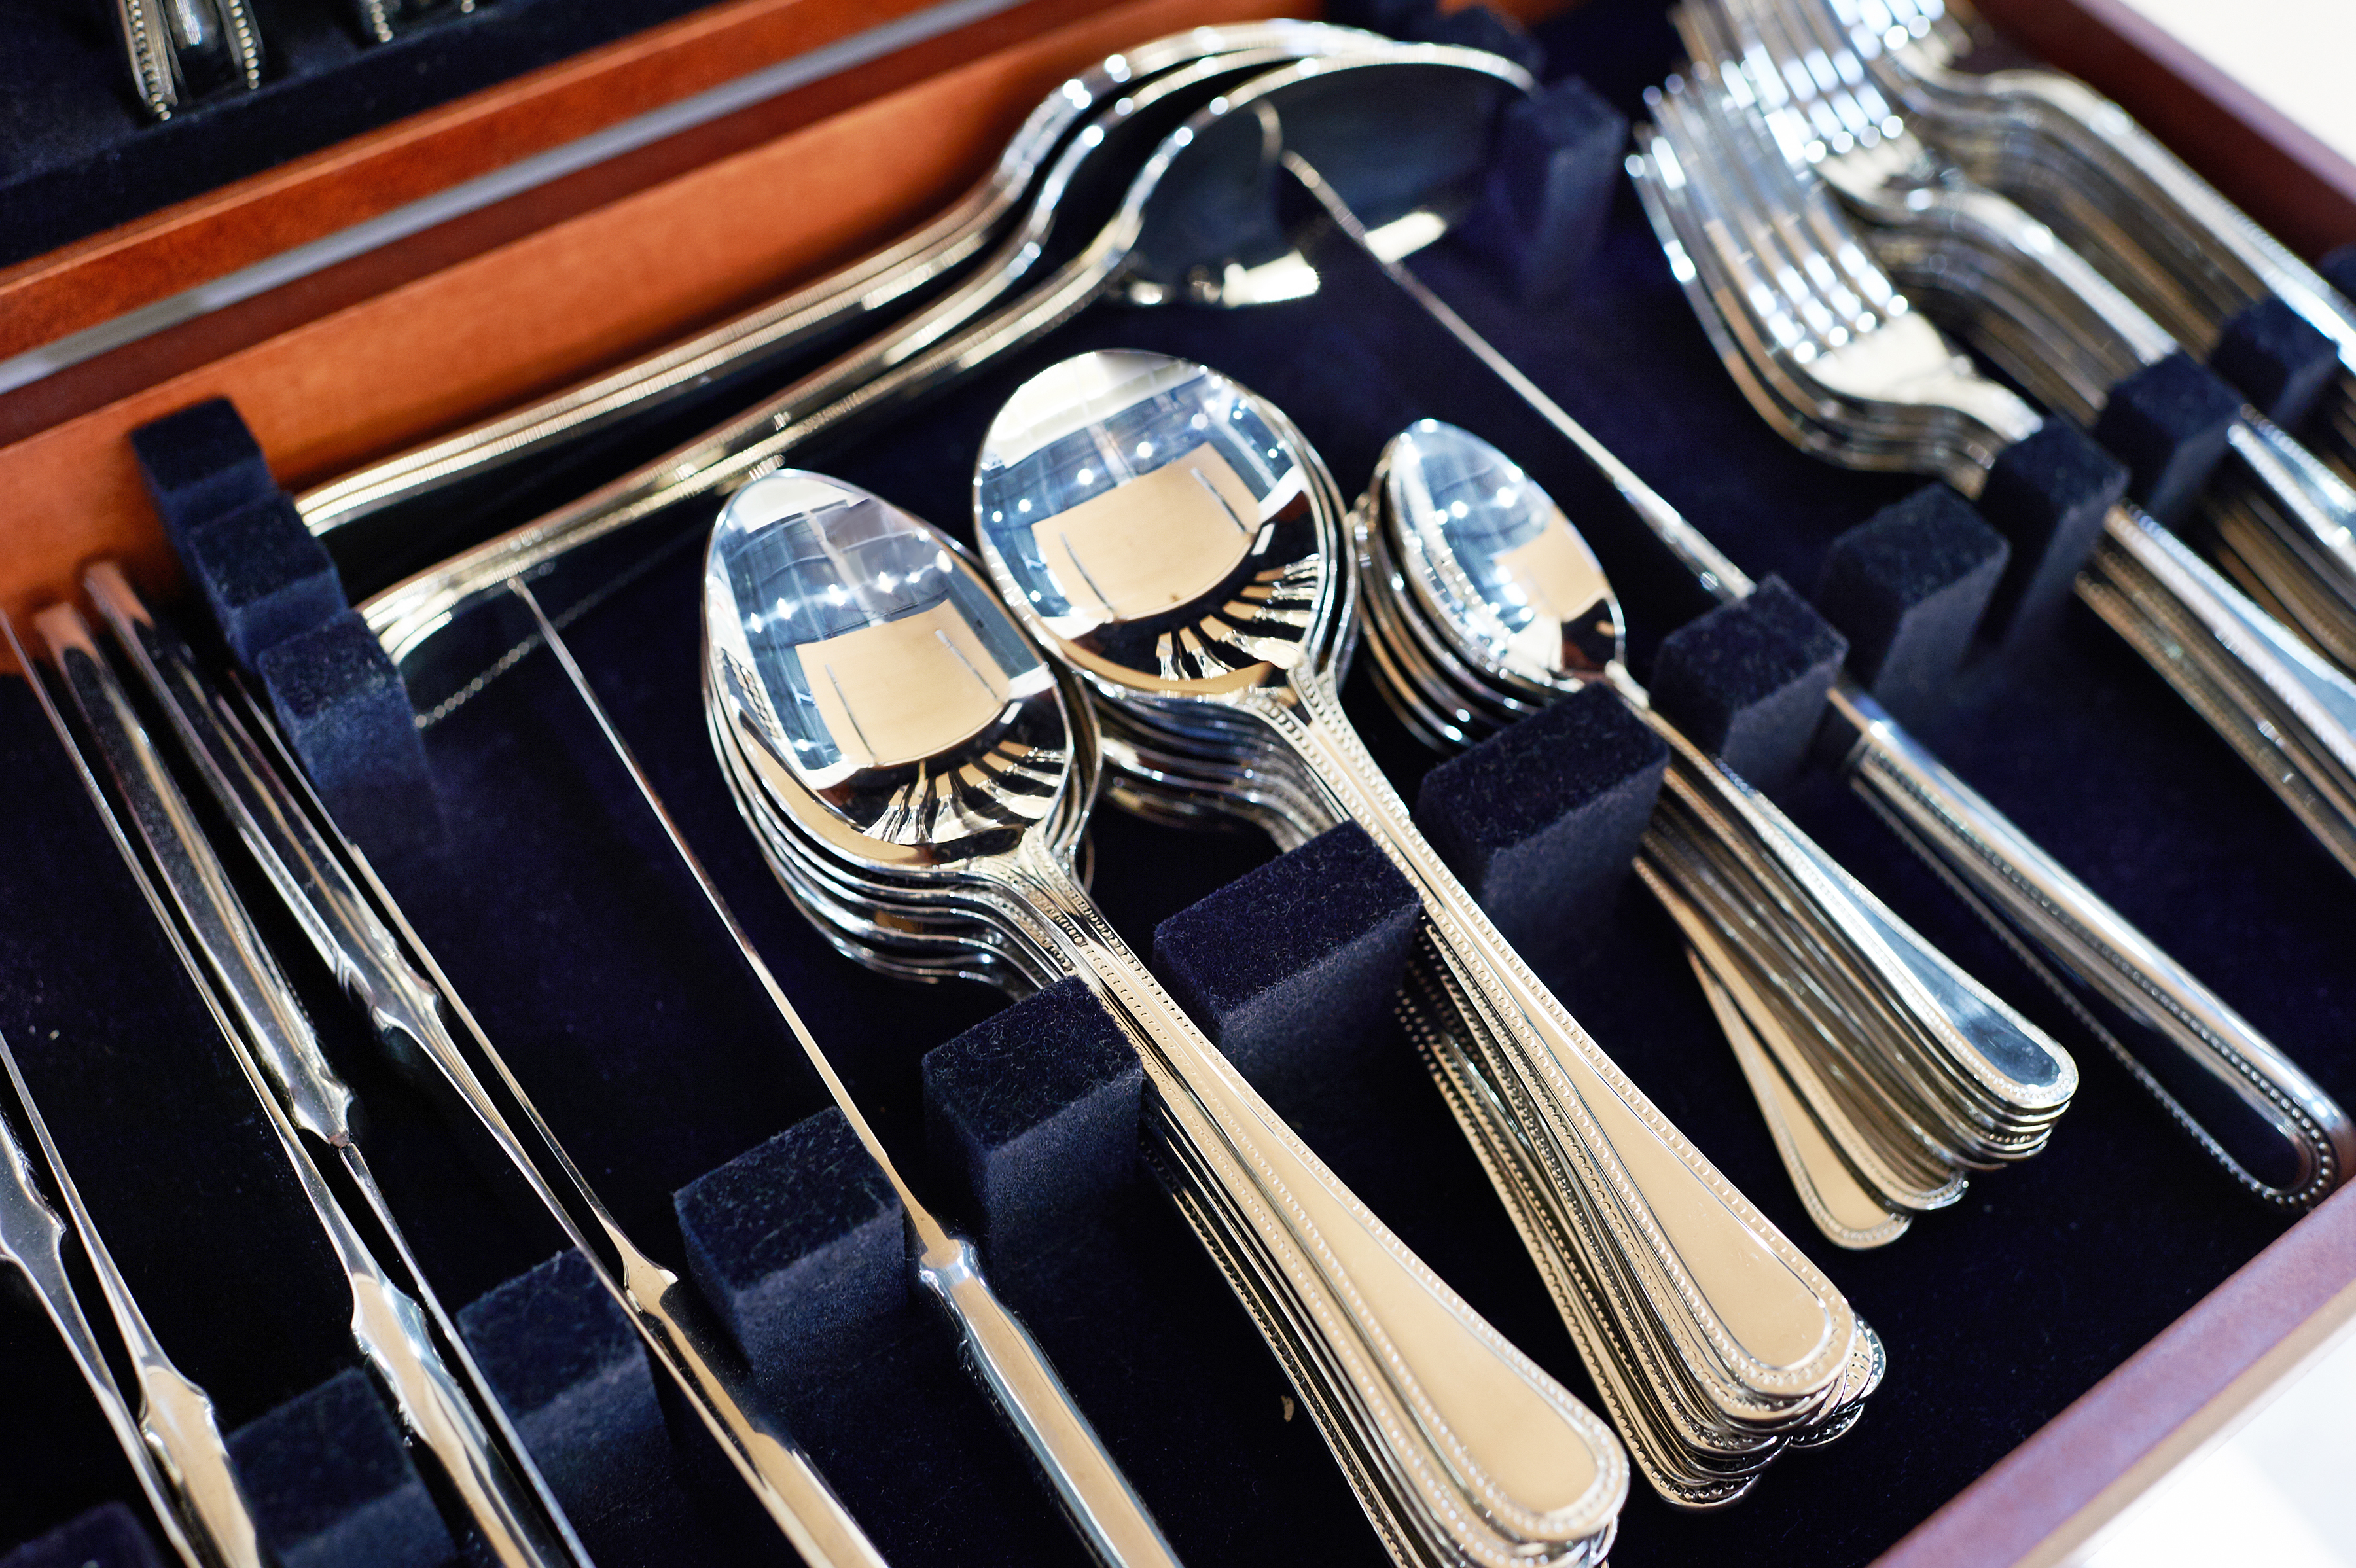 Soup Spoons vs. Dinner Spoons: What Exactly Is the Difference